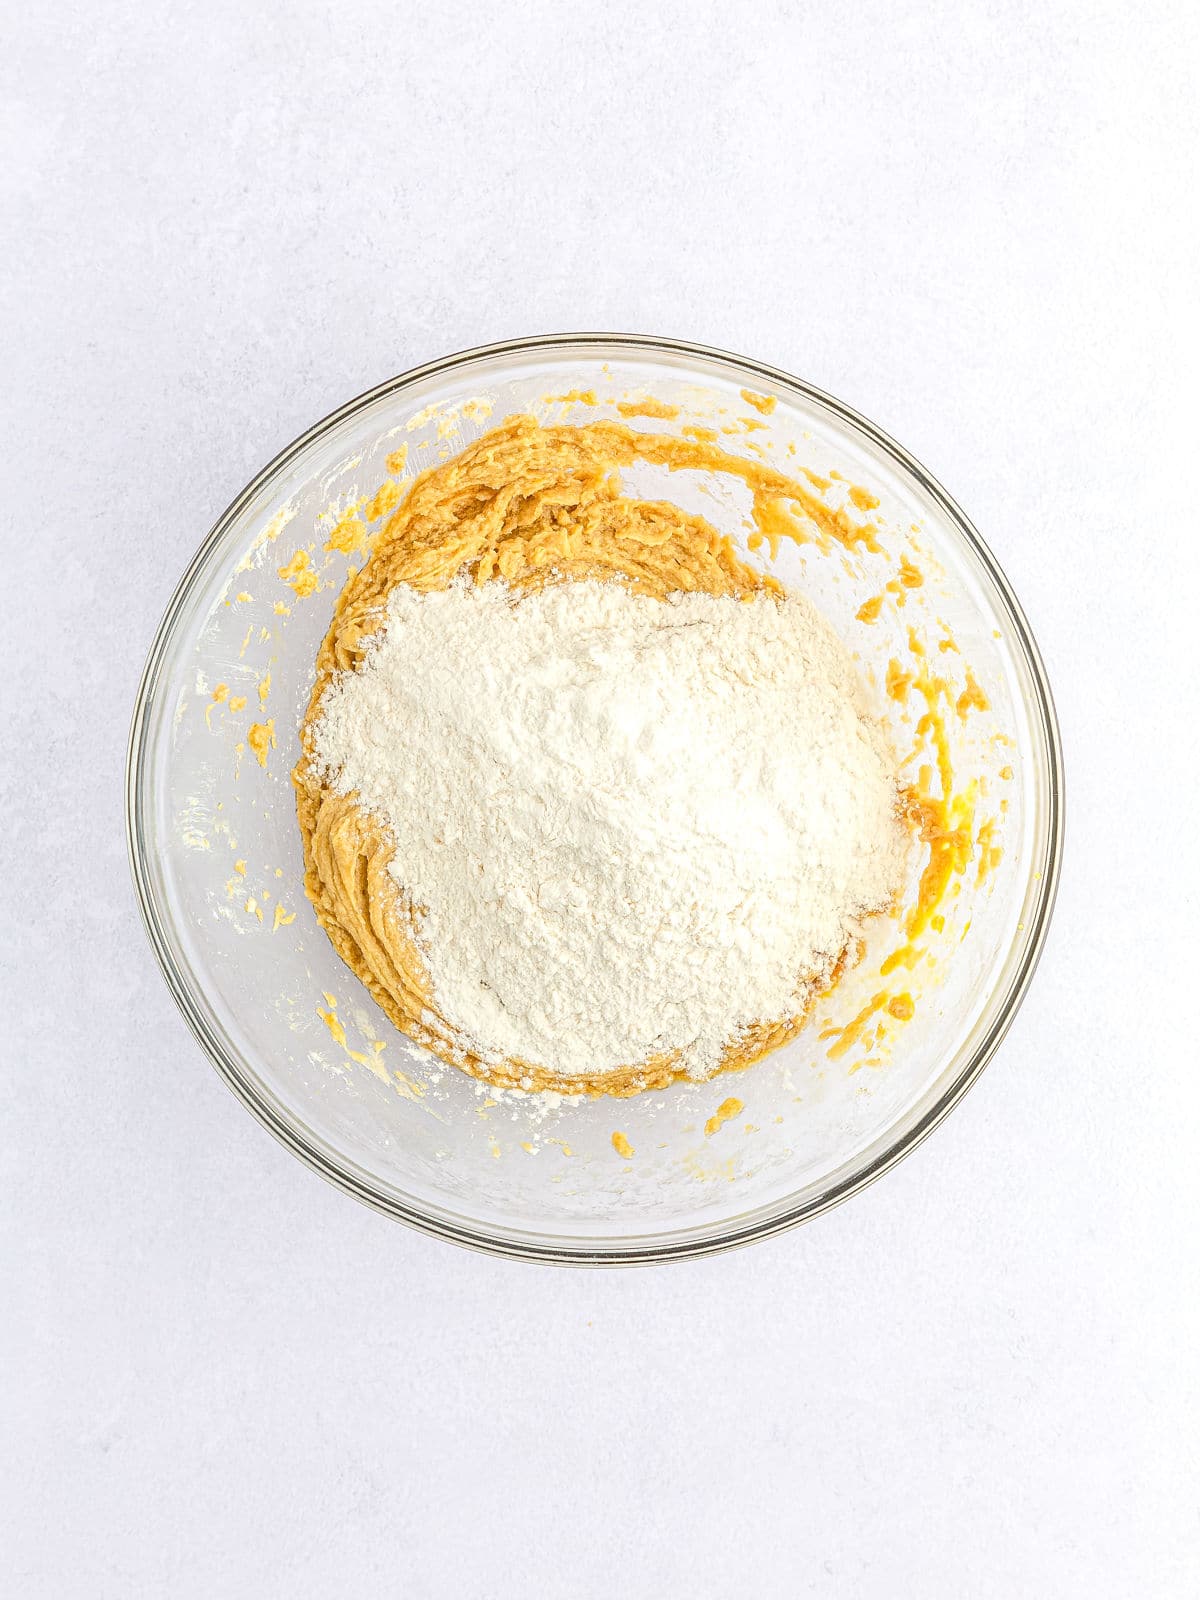 Mixing flour into batter in a glass bowl.